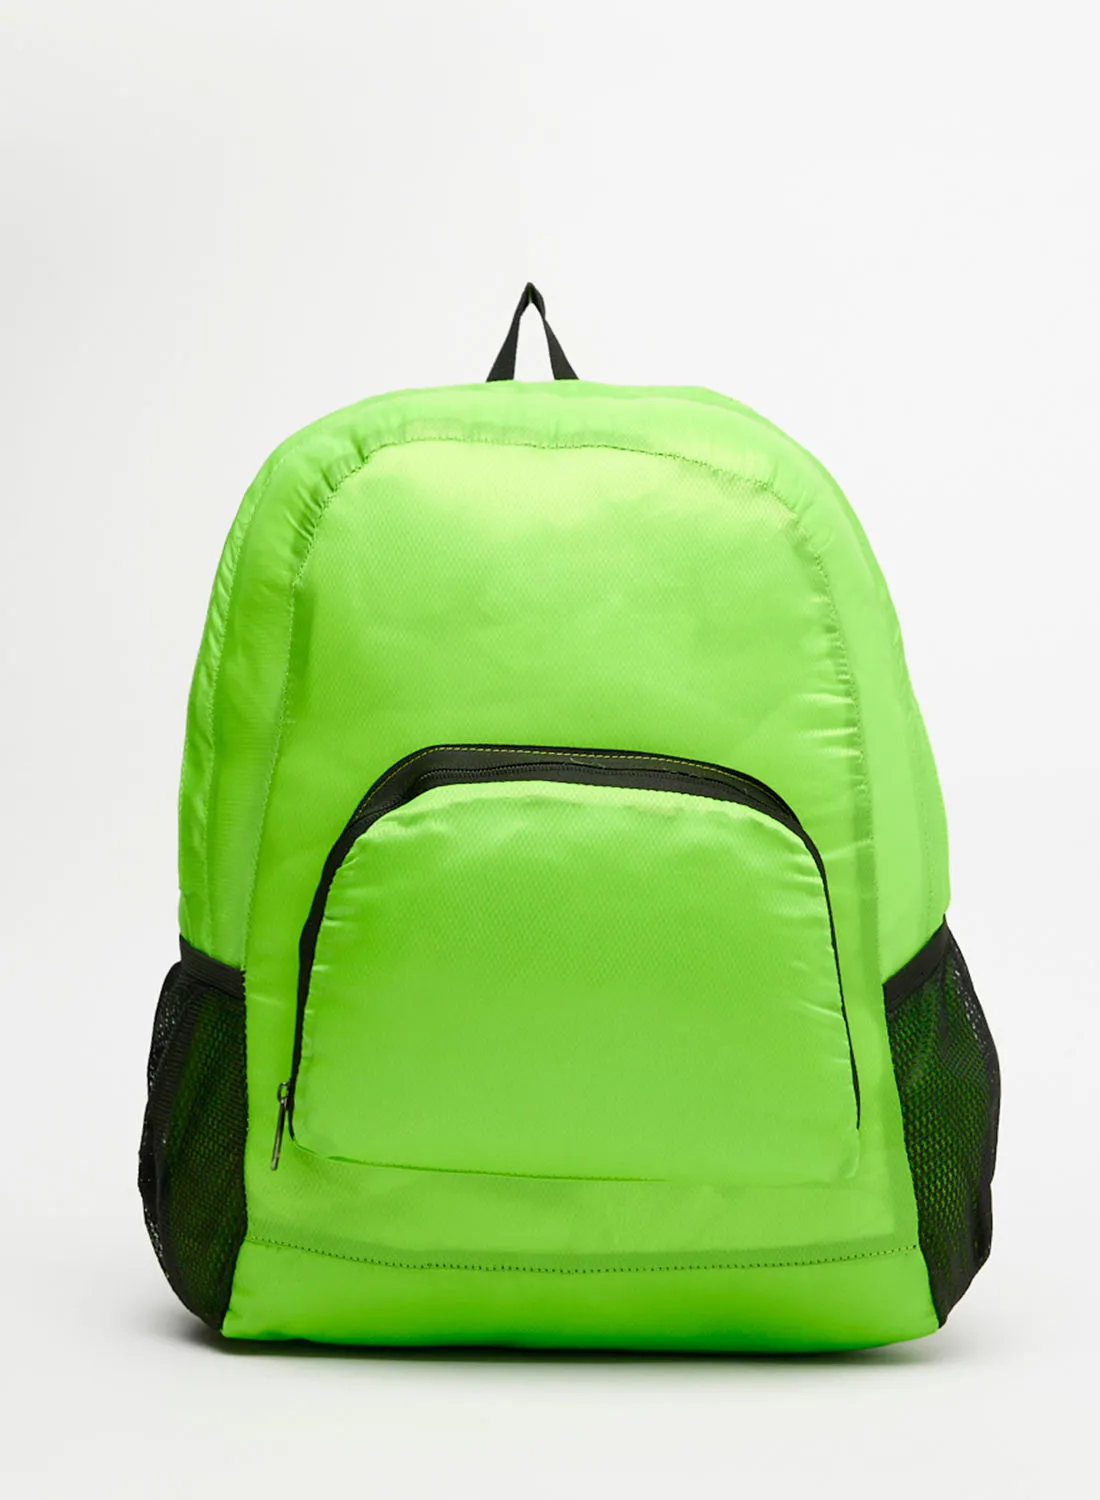 Amal Unisex Casual Dyed Polyester One Size Backpack Green